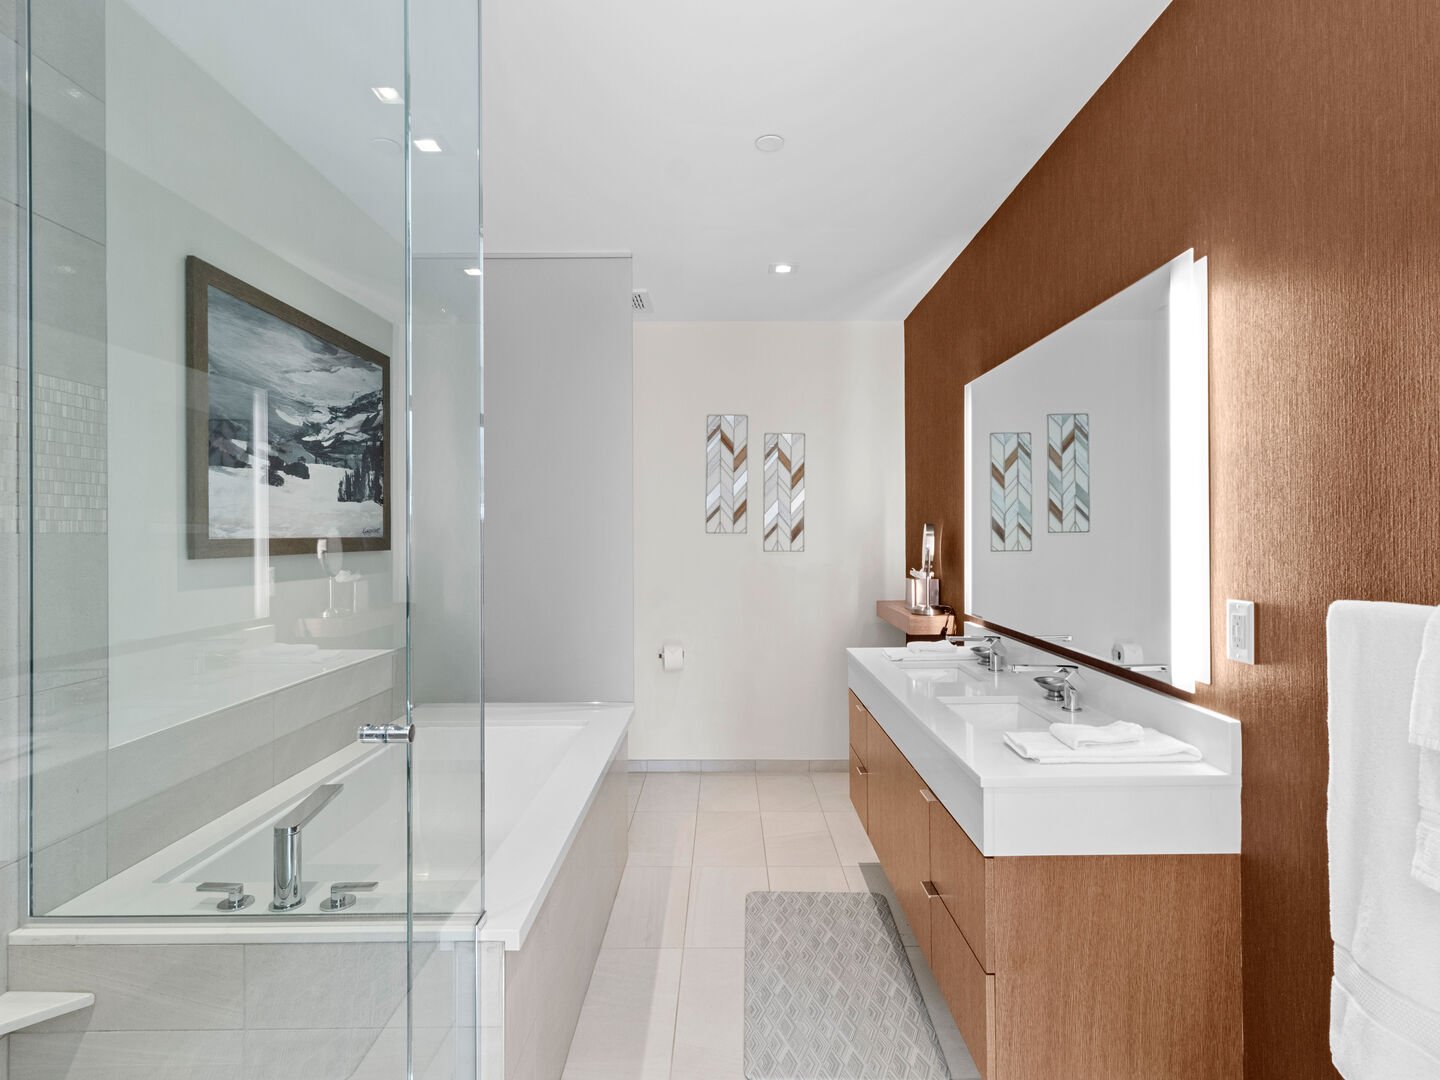 Primary Bathroom with Soaking Tub and Walk-In Shower